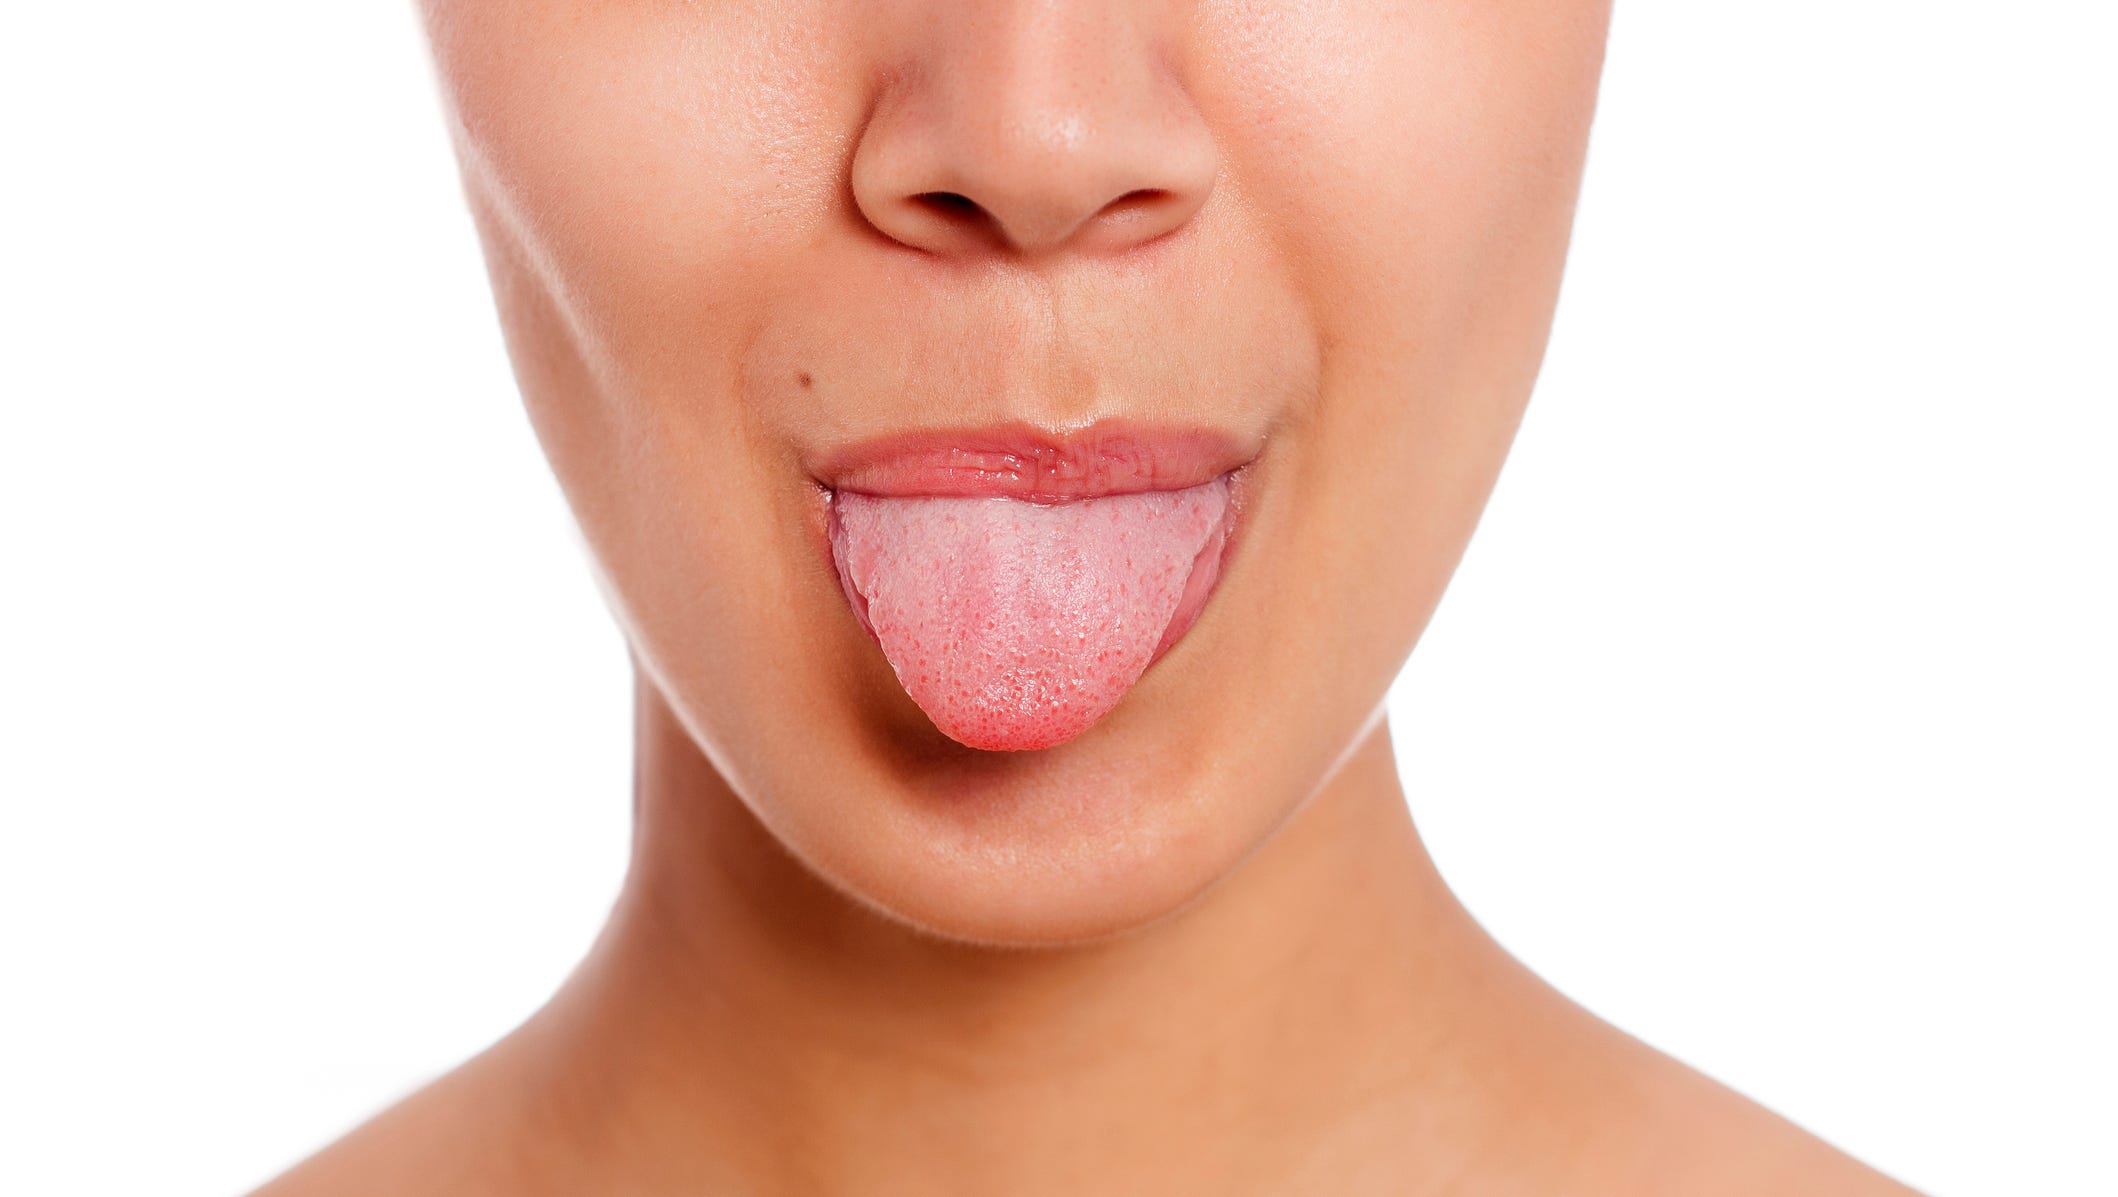 The tongue is one of the strongest muscles in the body